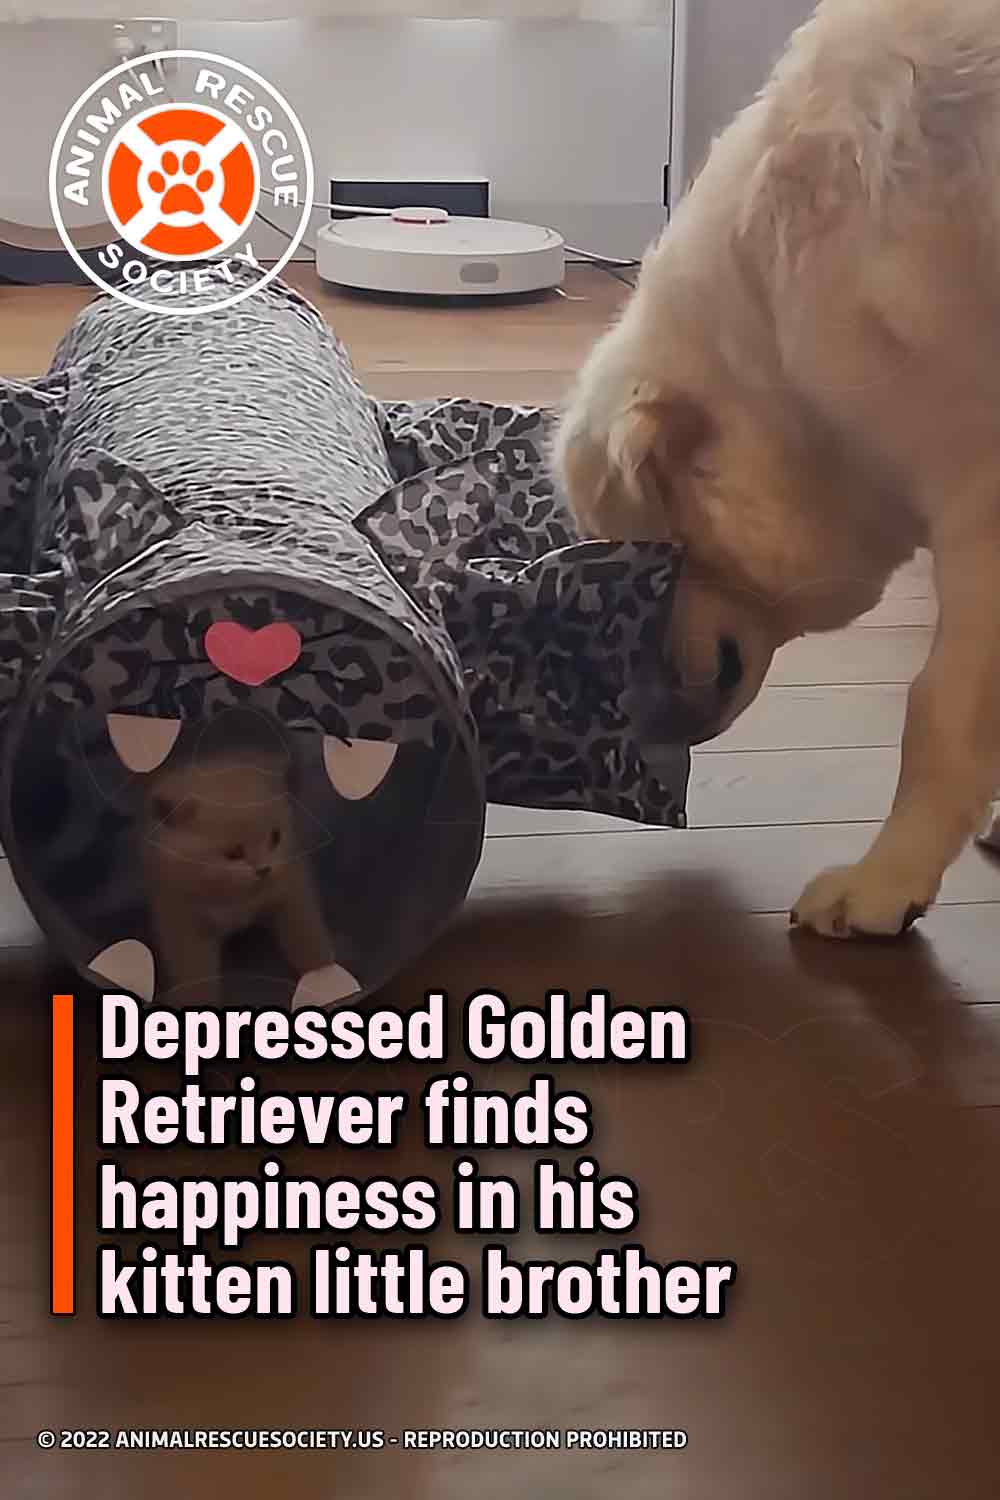 Depressed Golden Retriever finds happiness in his kitten little brother